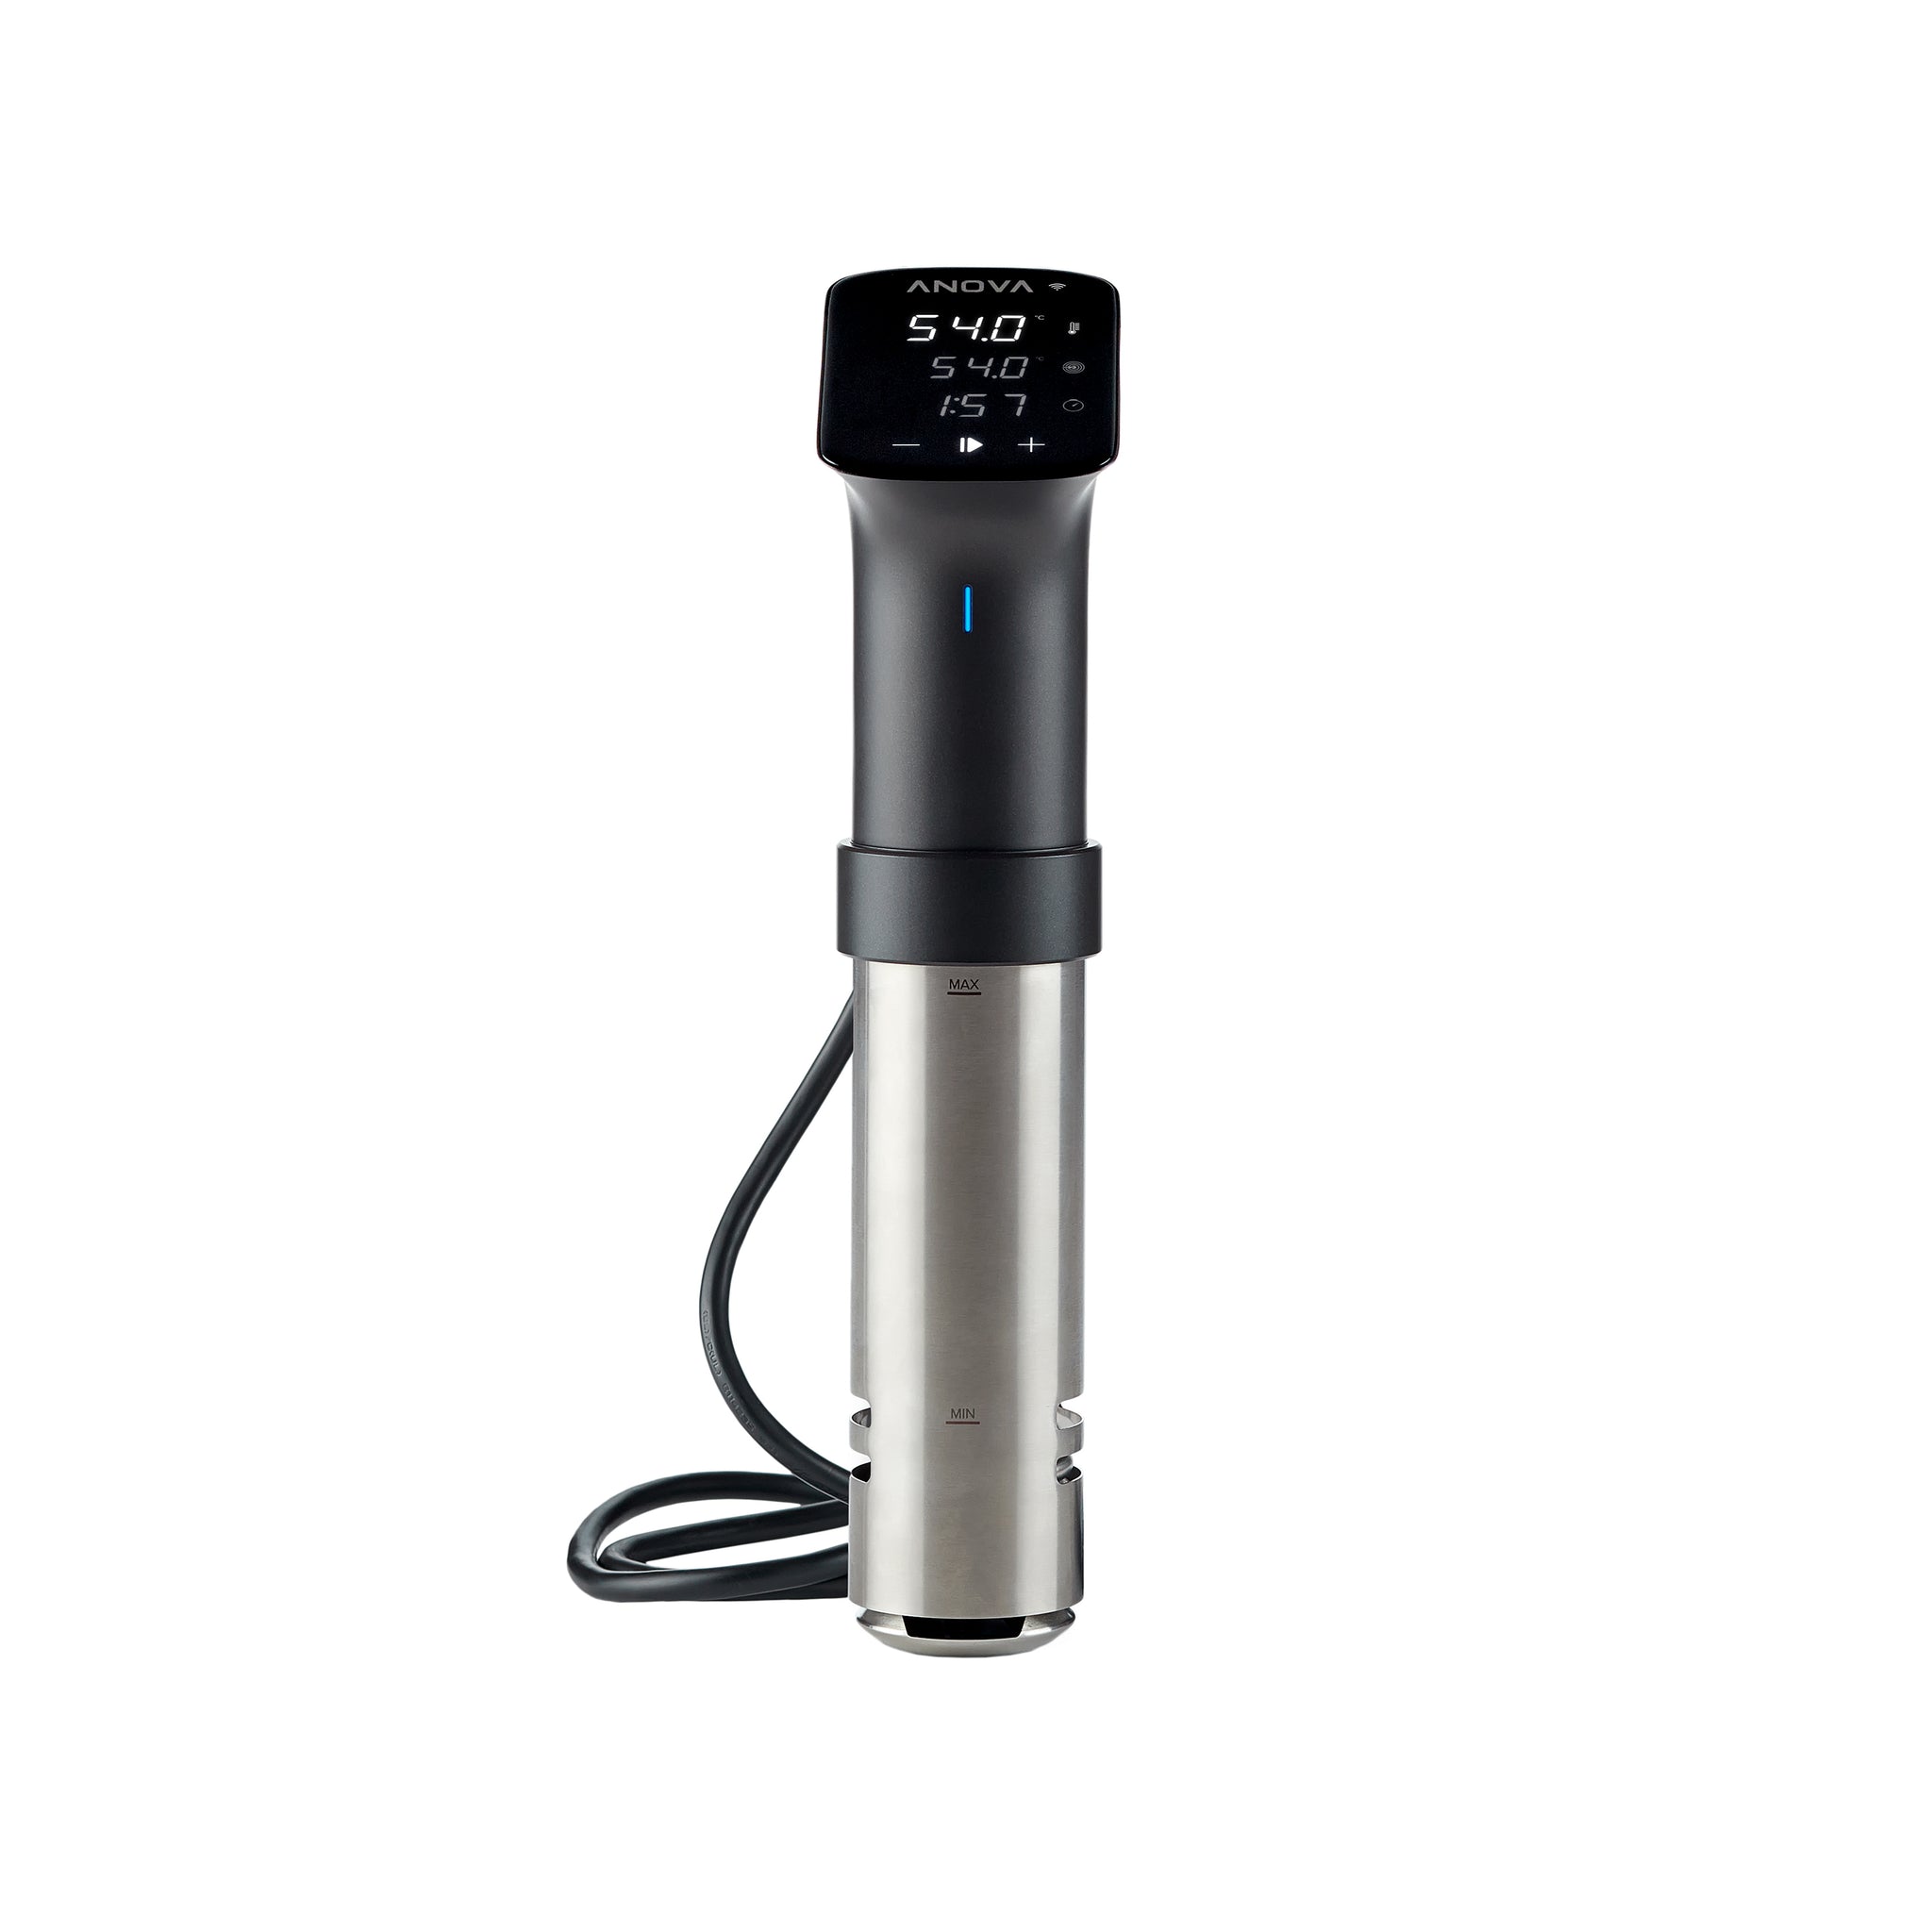 Buy Anova Precision Cooker Pro sous-vide stick 1800W? Order before 22.00,  shipped today